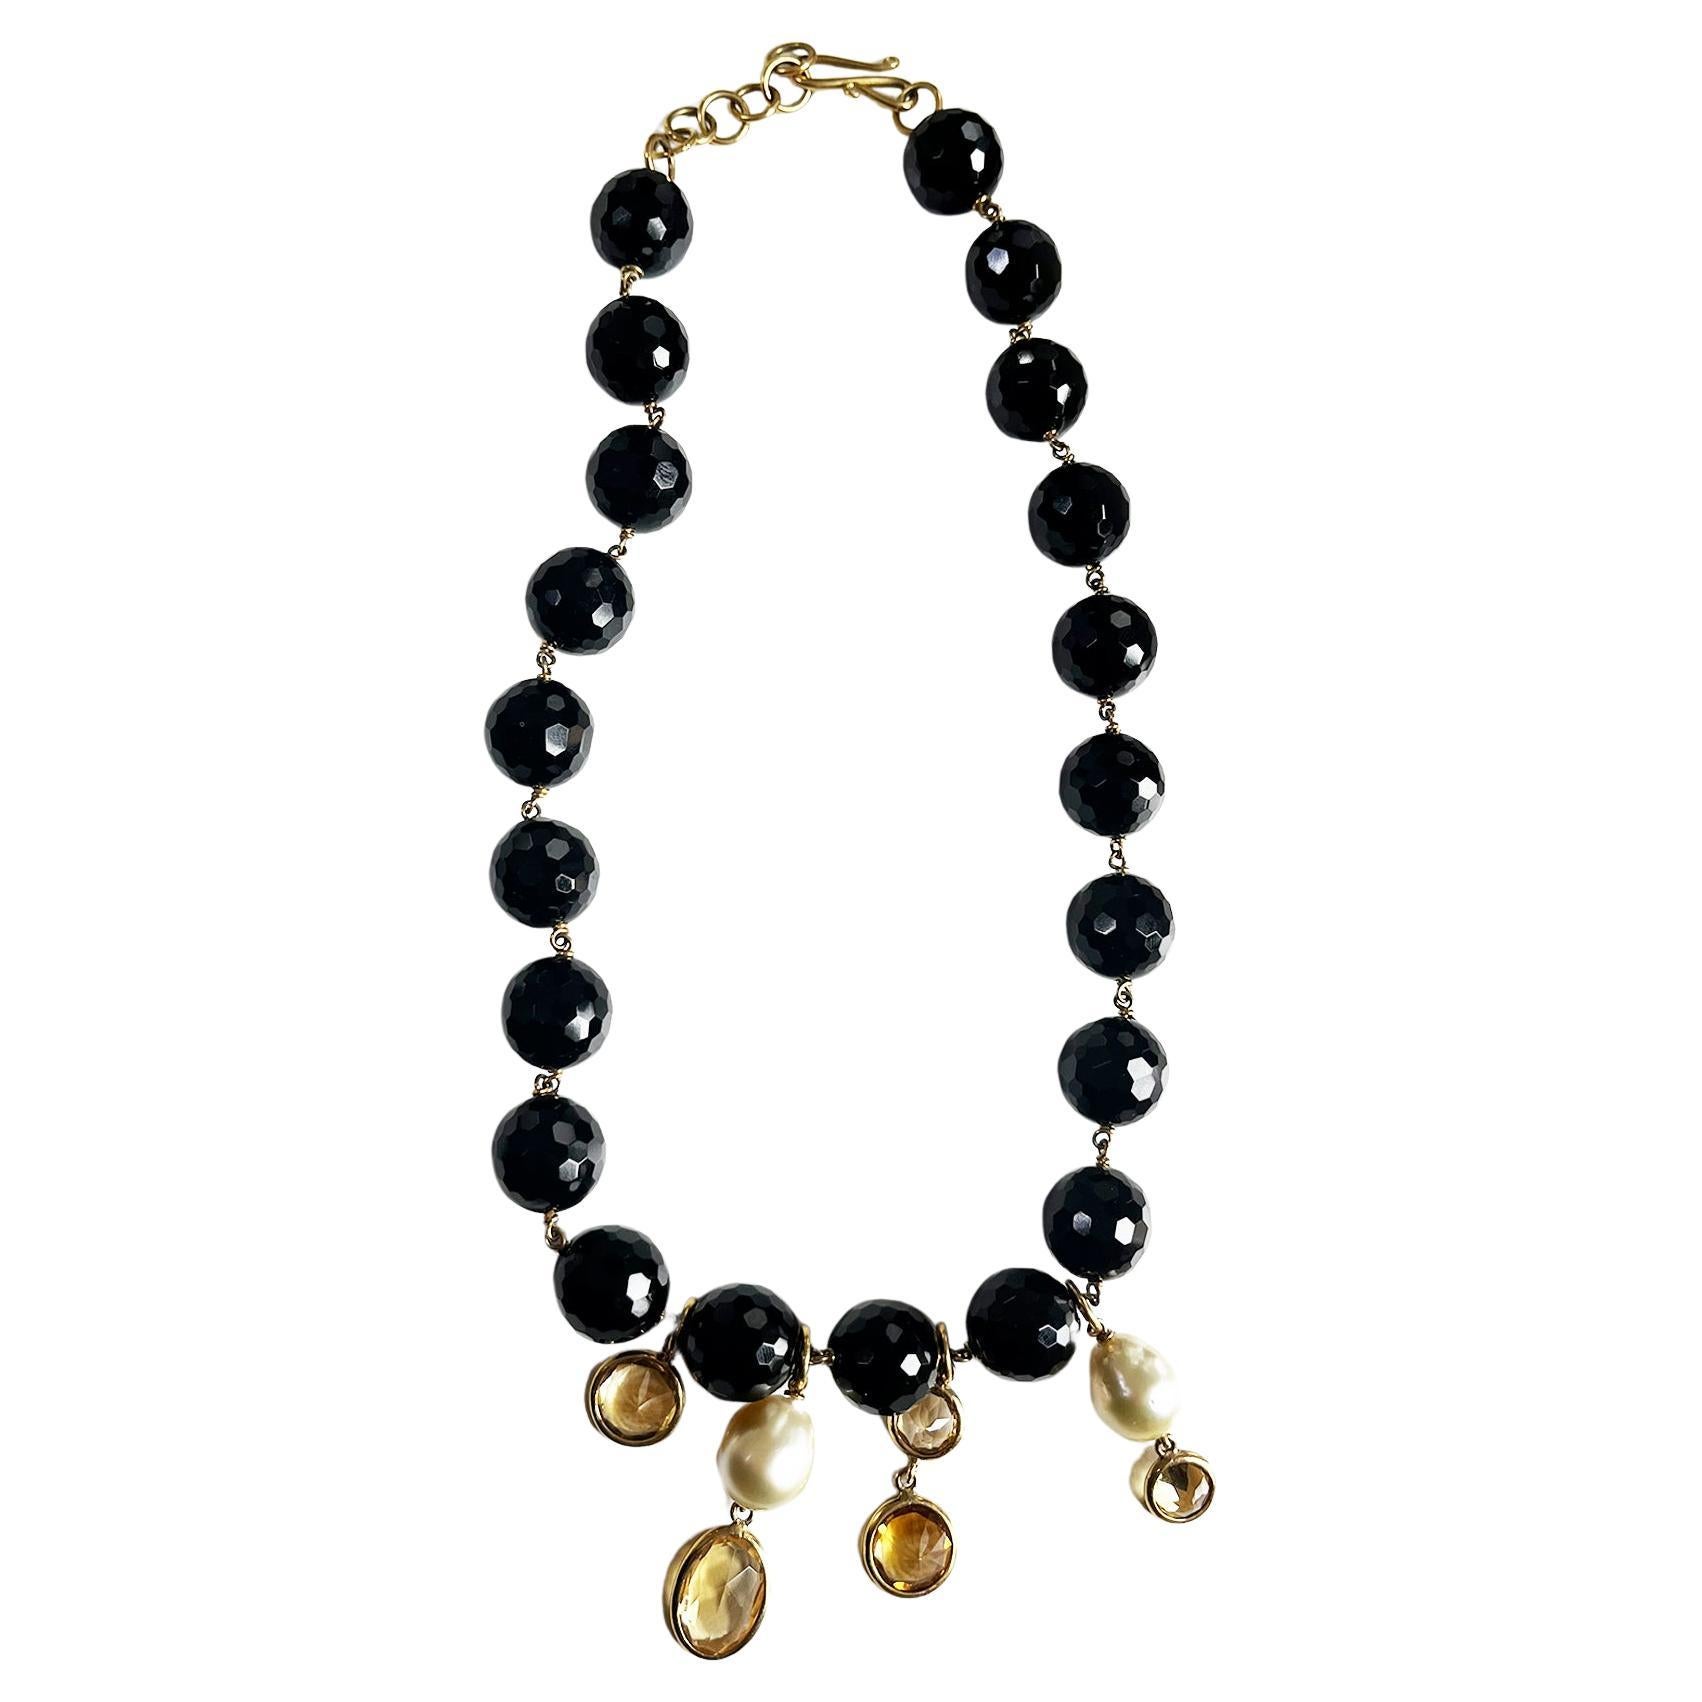 18KT pink gold necklace with Onyx beads, pearls and citrine quartzes